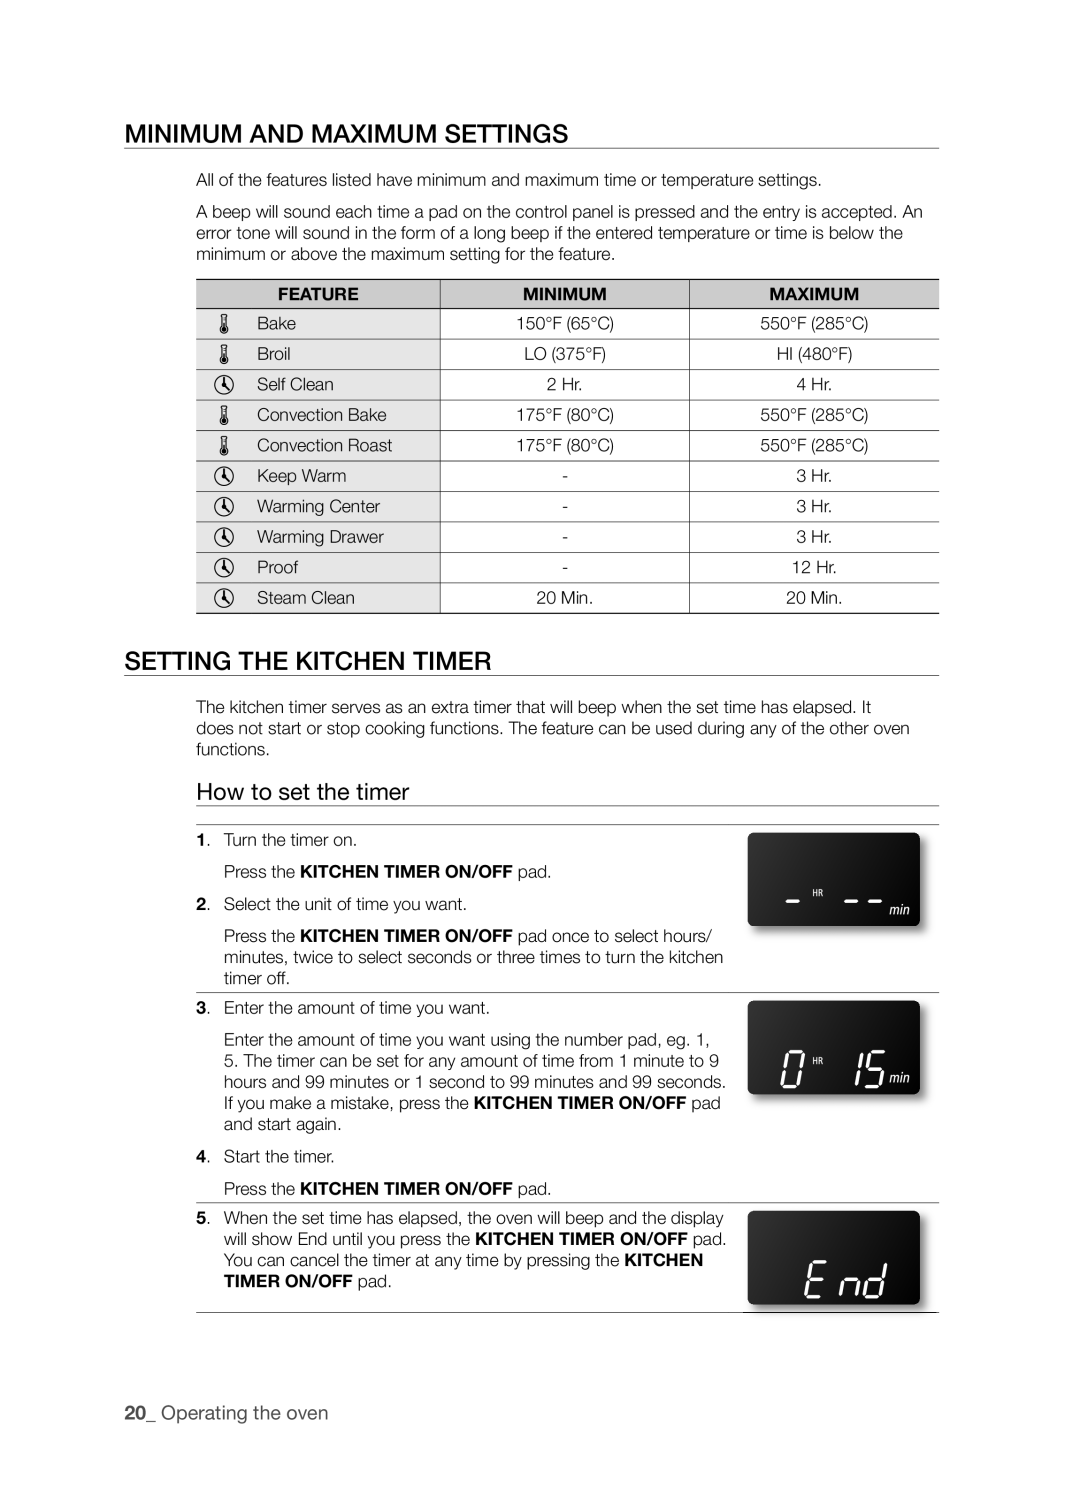 Samsung FTQ352IWUX Minimum And Maximum Settings, Setting The Kitchen Timer, How to set the timer, Operating the oven 